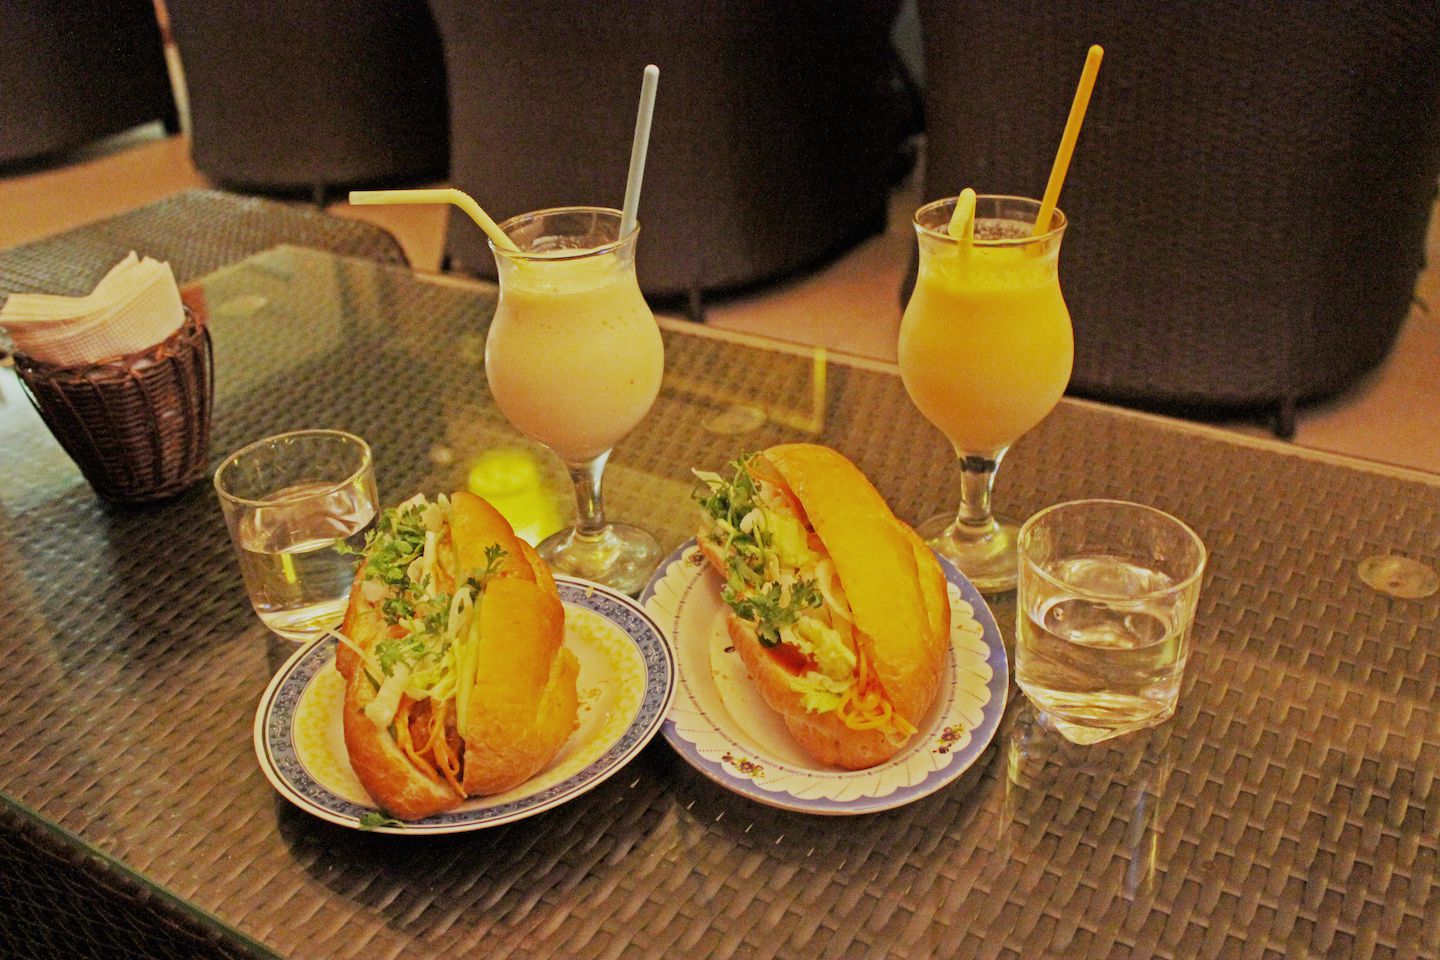 Banh mys with fruit smoothies